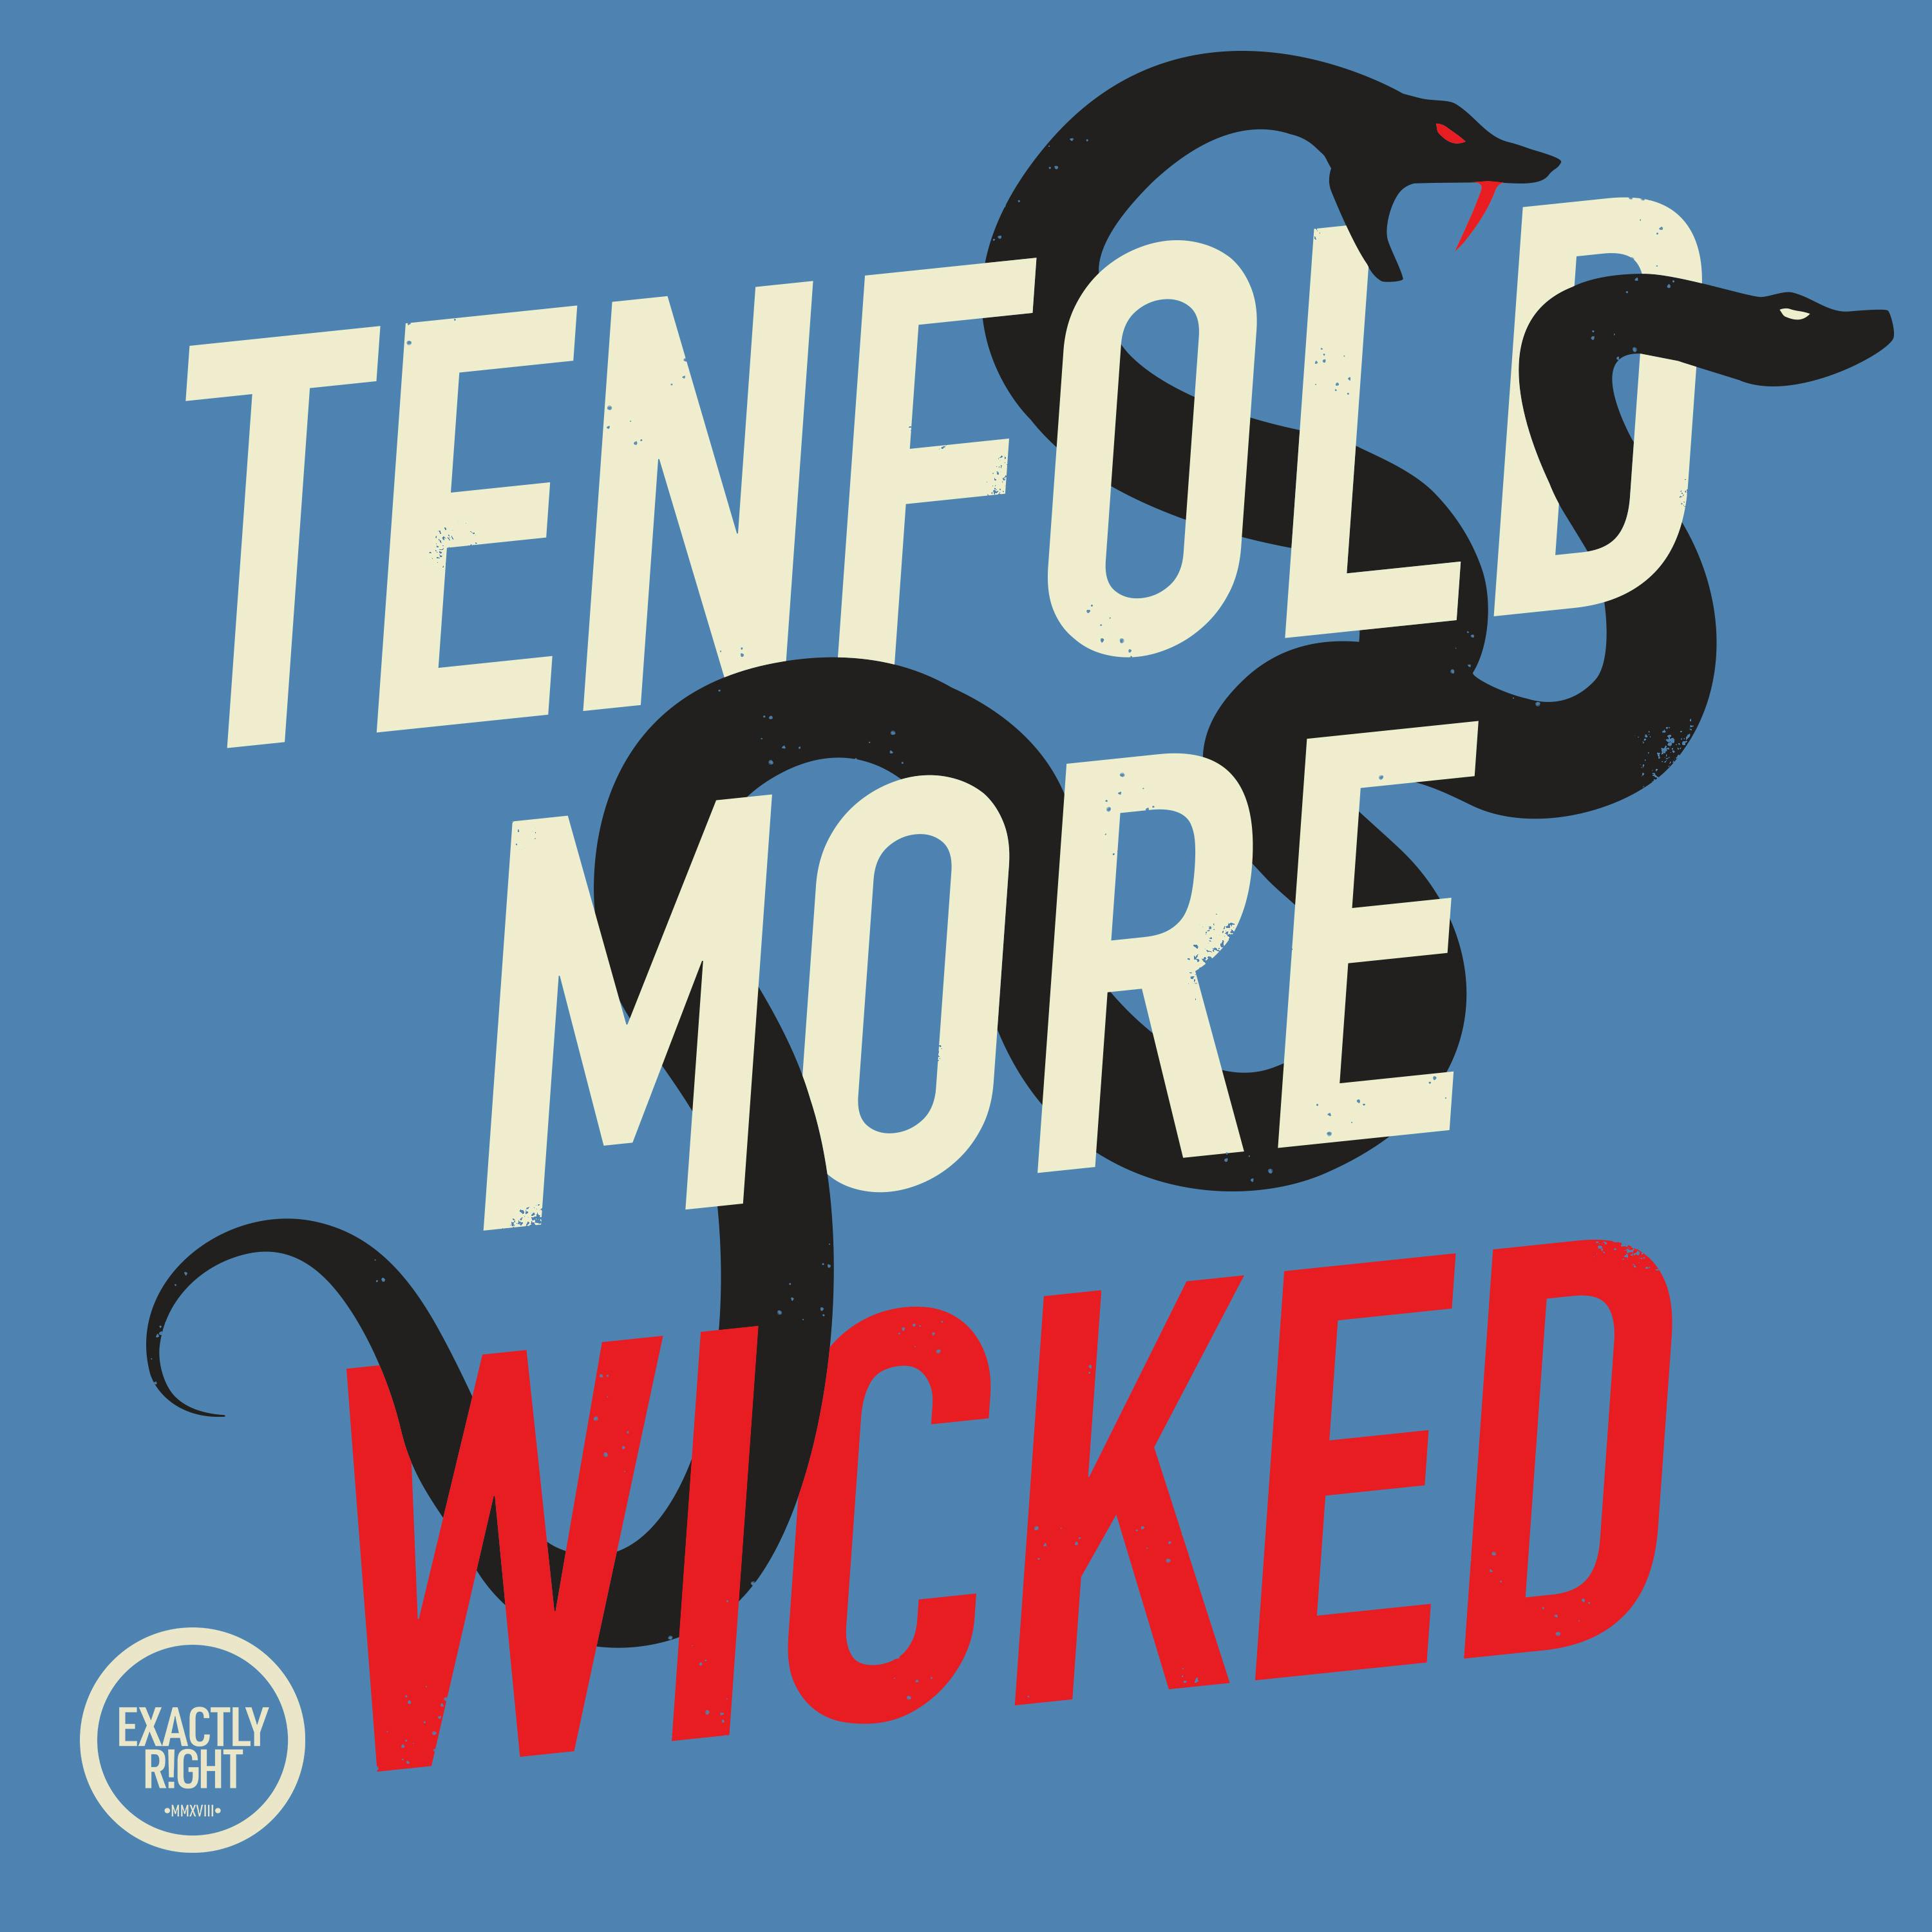 Tenfold More Wicked - Entitled: The Secret Court